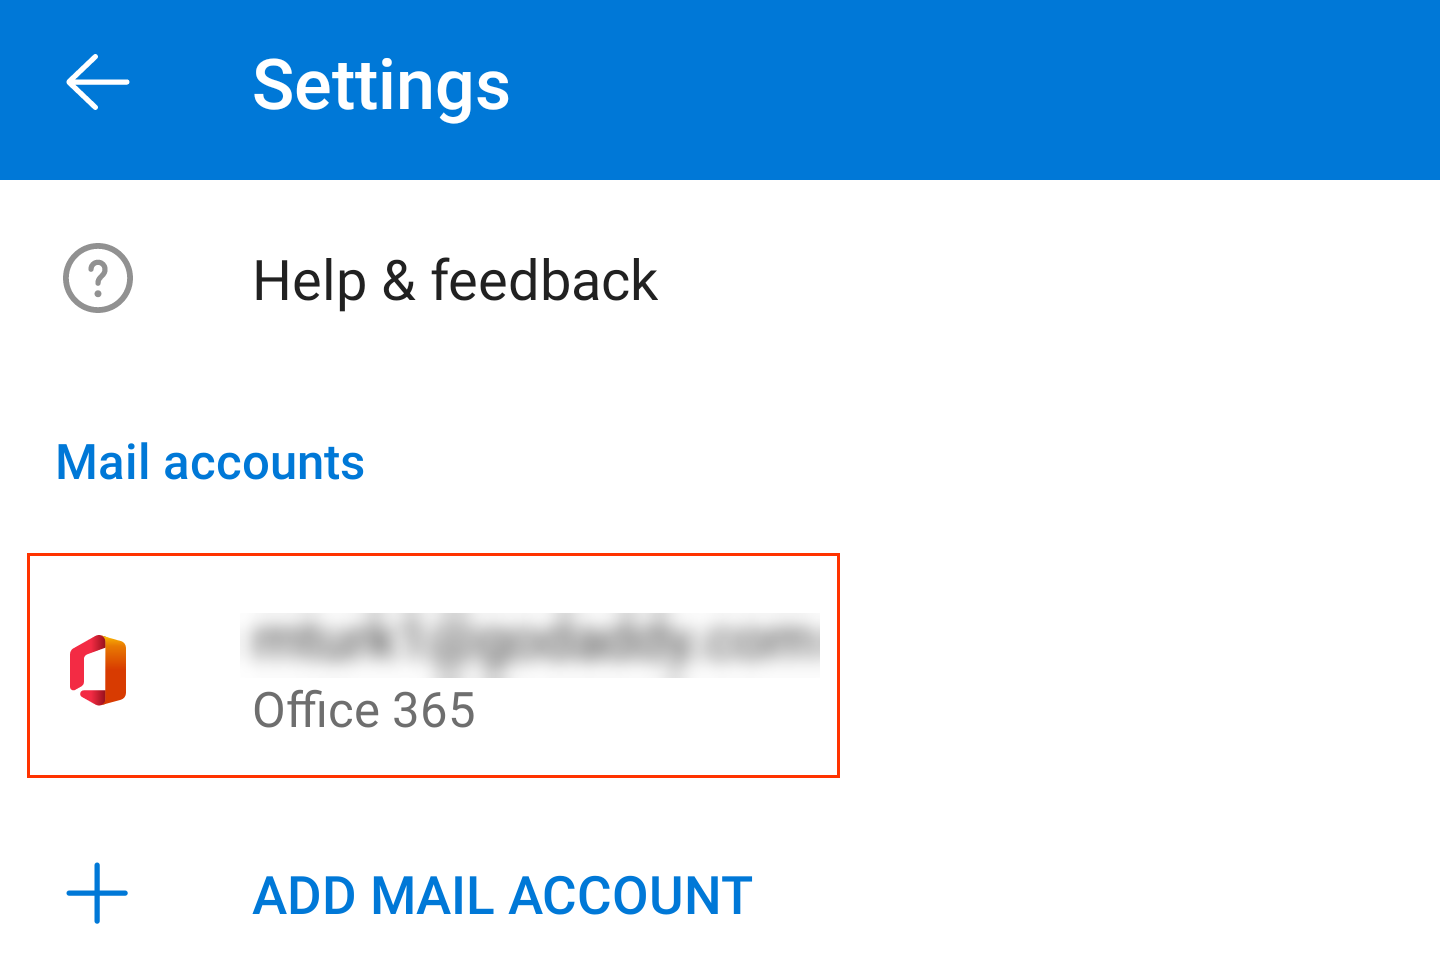 godaddy office 365 email settings android